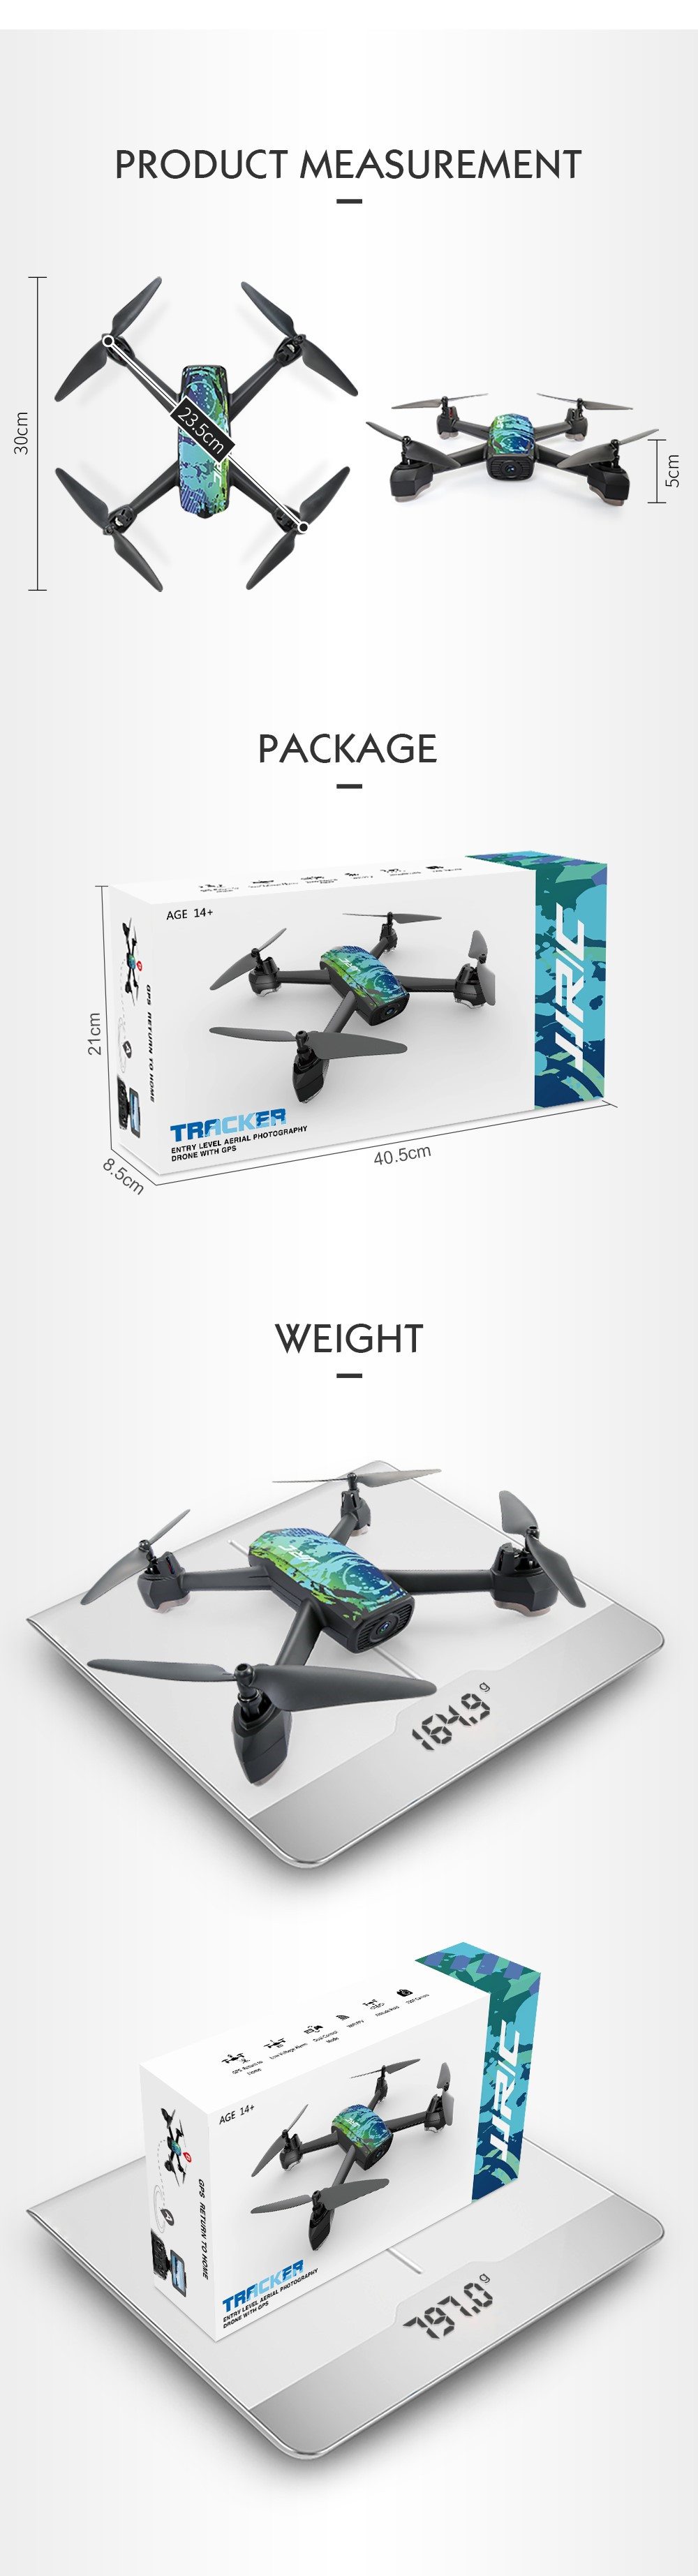 JJRC-H55-TRACKER-WIFI-FPV-With-720P-HD-Camera-GPS-Positioning-RC-Drone-Quadcopter-RTF-1218444-9